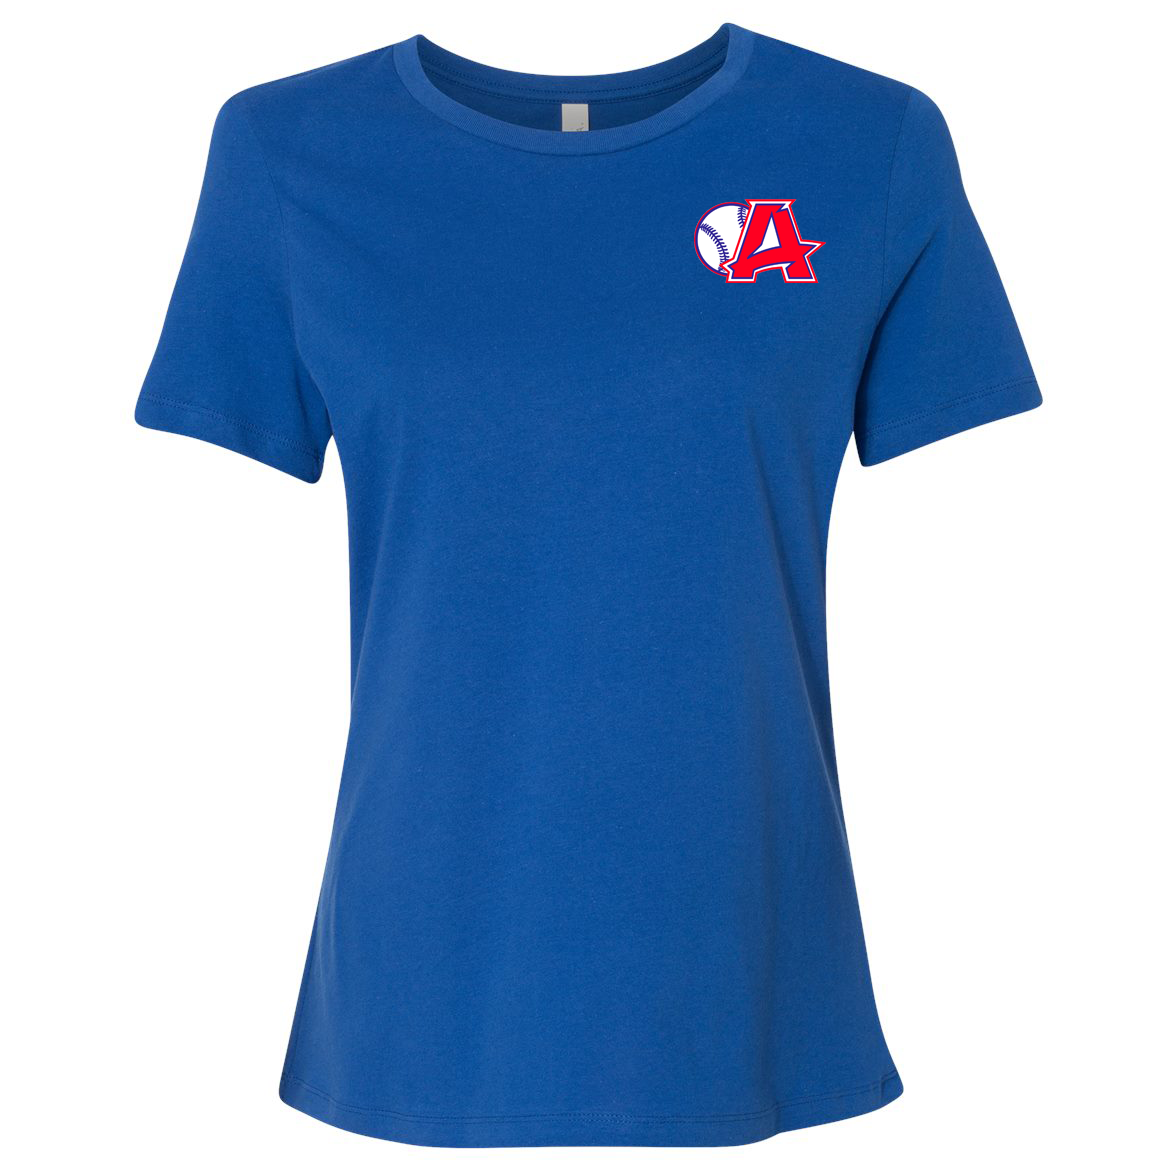 Arcadia HS Baseball Women's Relaxed Fit Tee